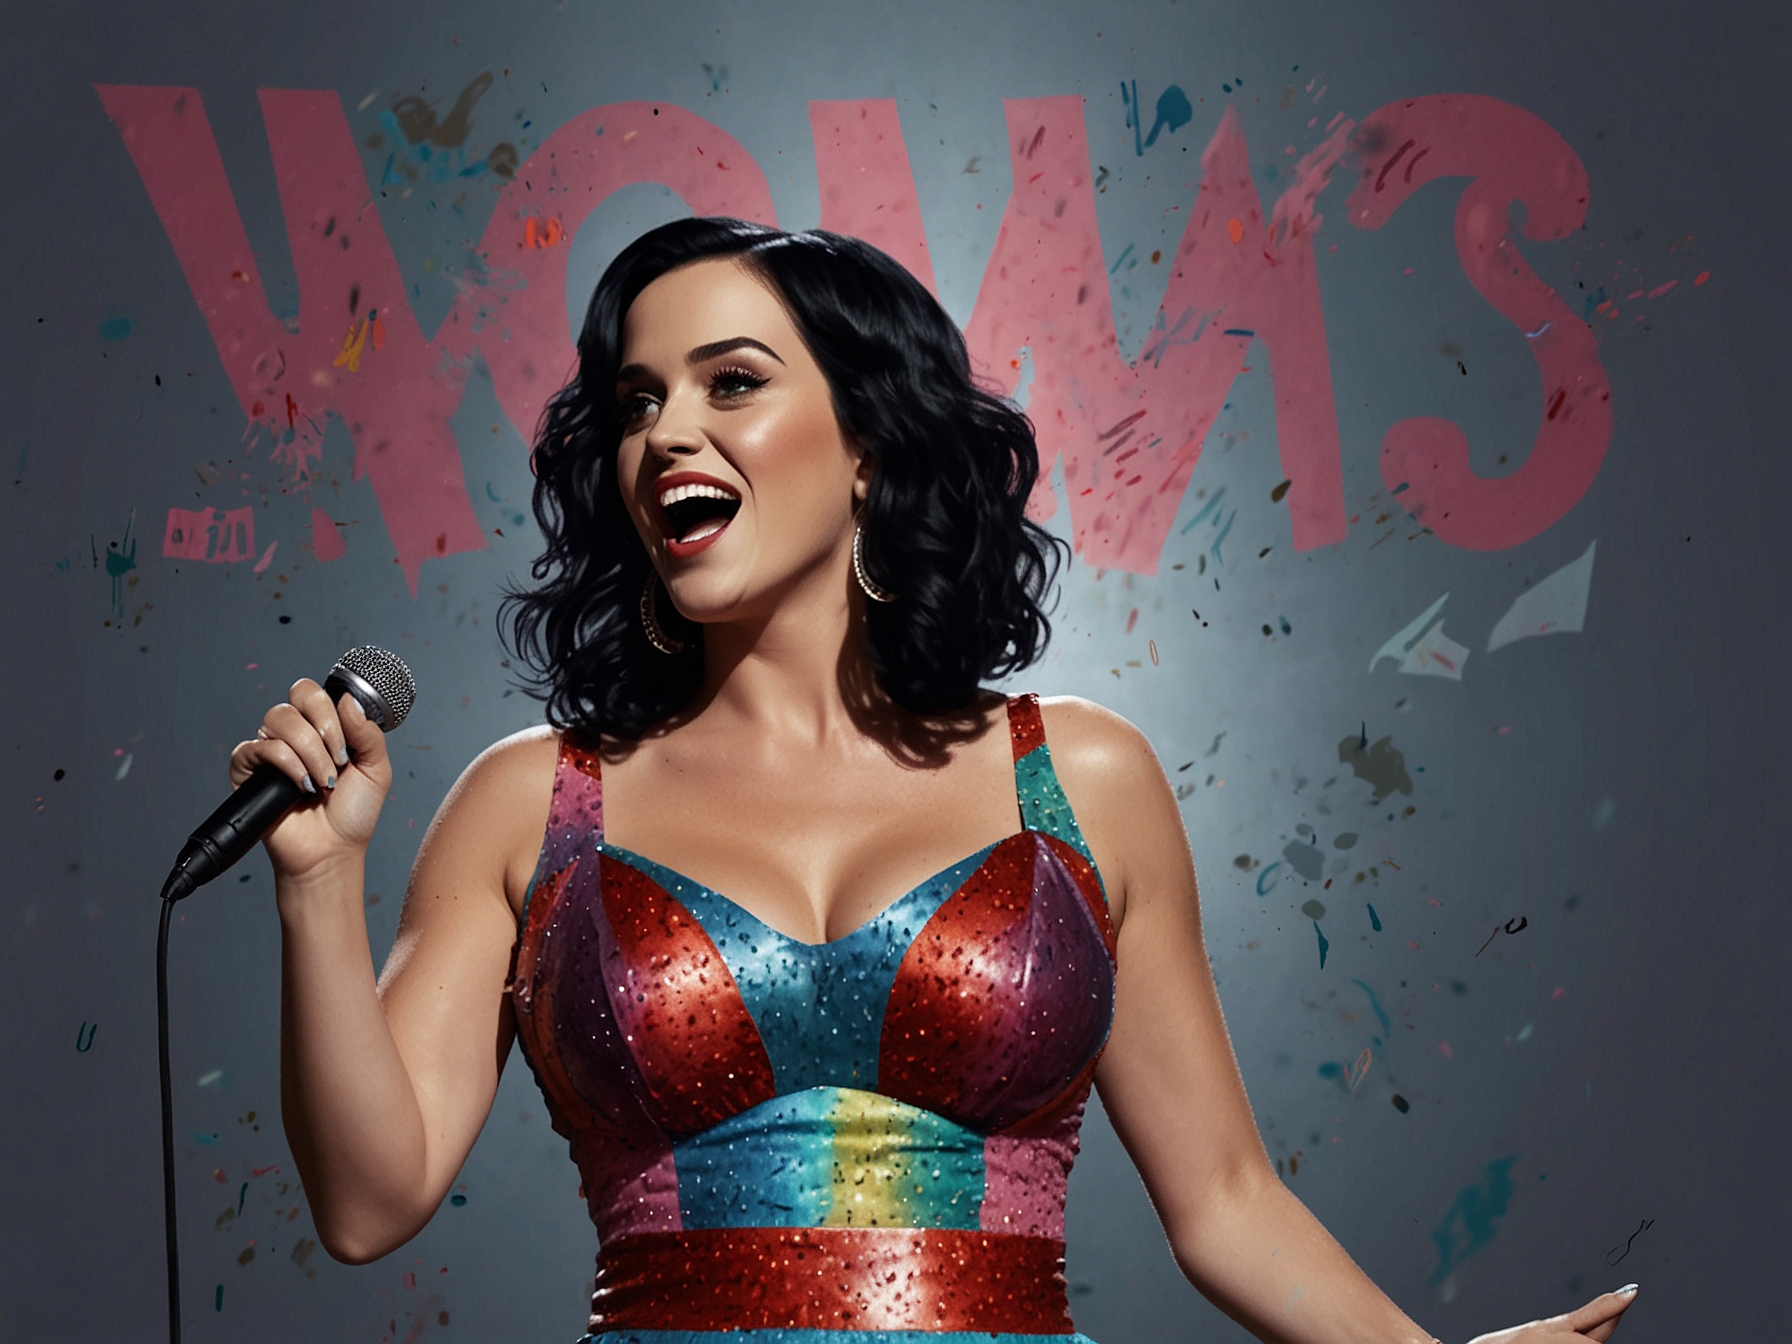 Katy Perry performing on stage, microphone in hand, with a dynamic background showcasing the words 'Woman’s World' in bold, celebrating female empowerment.